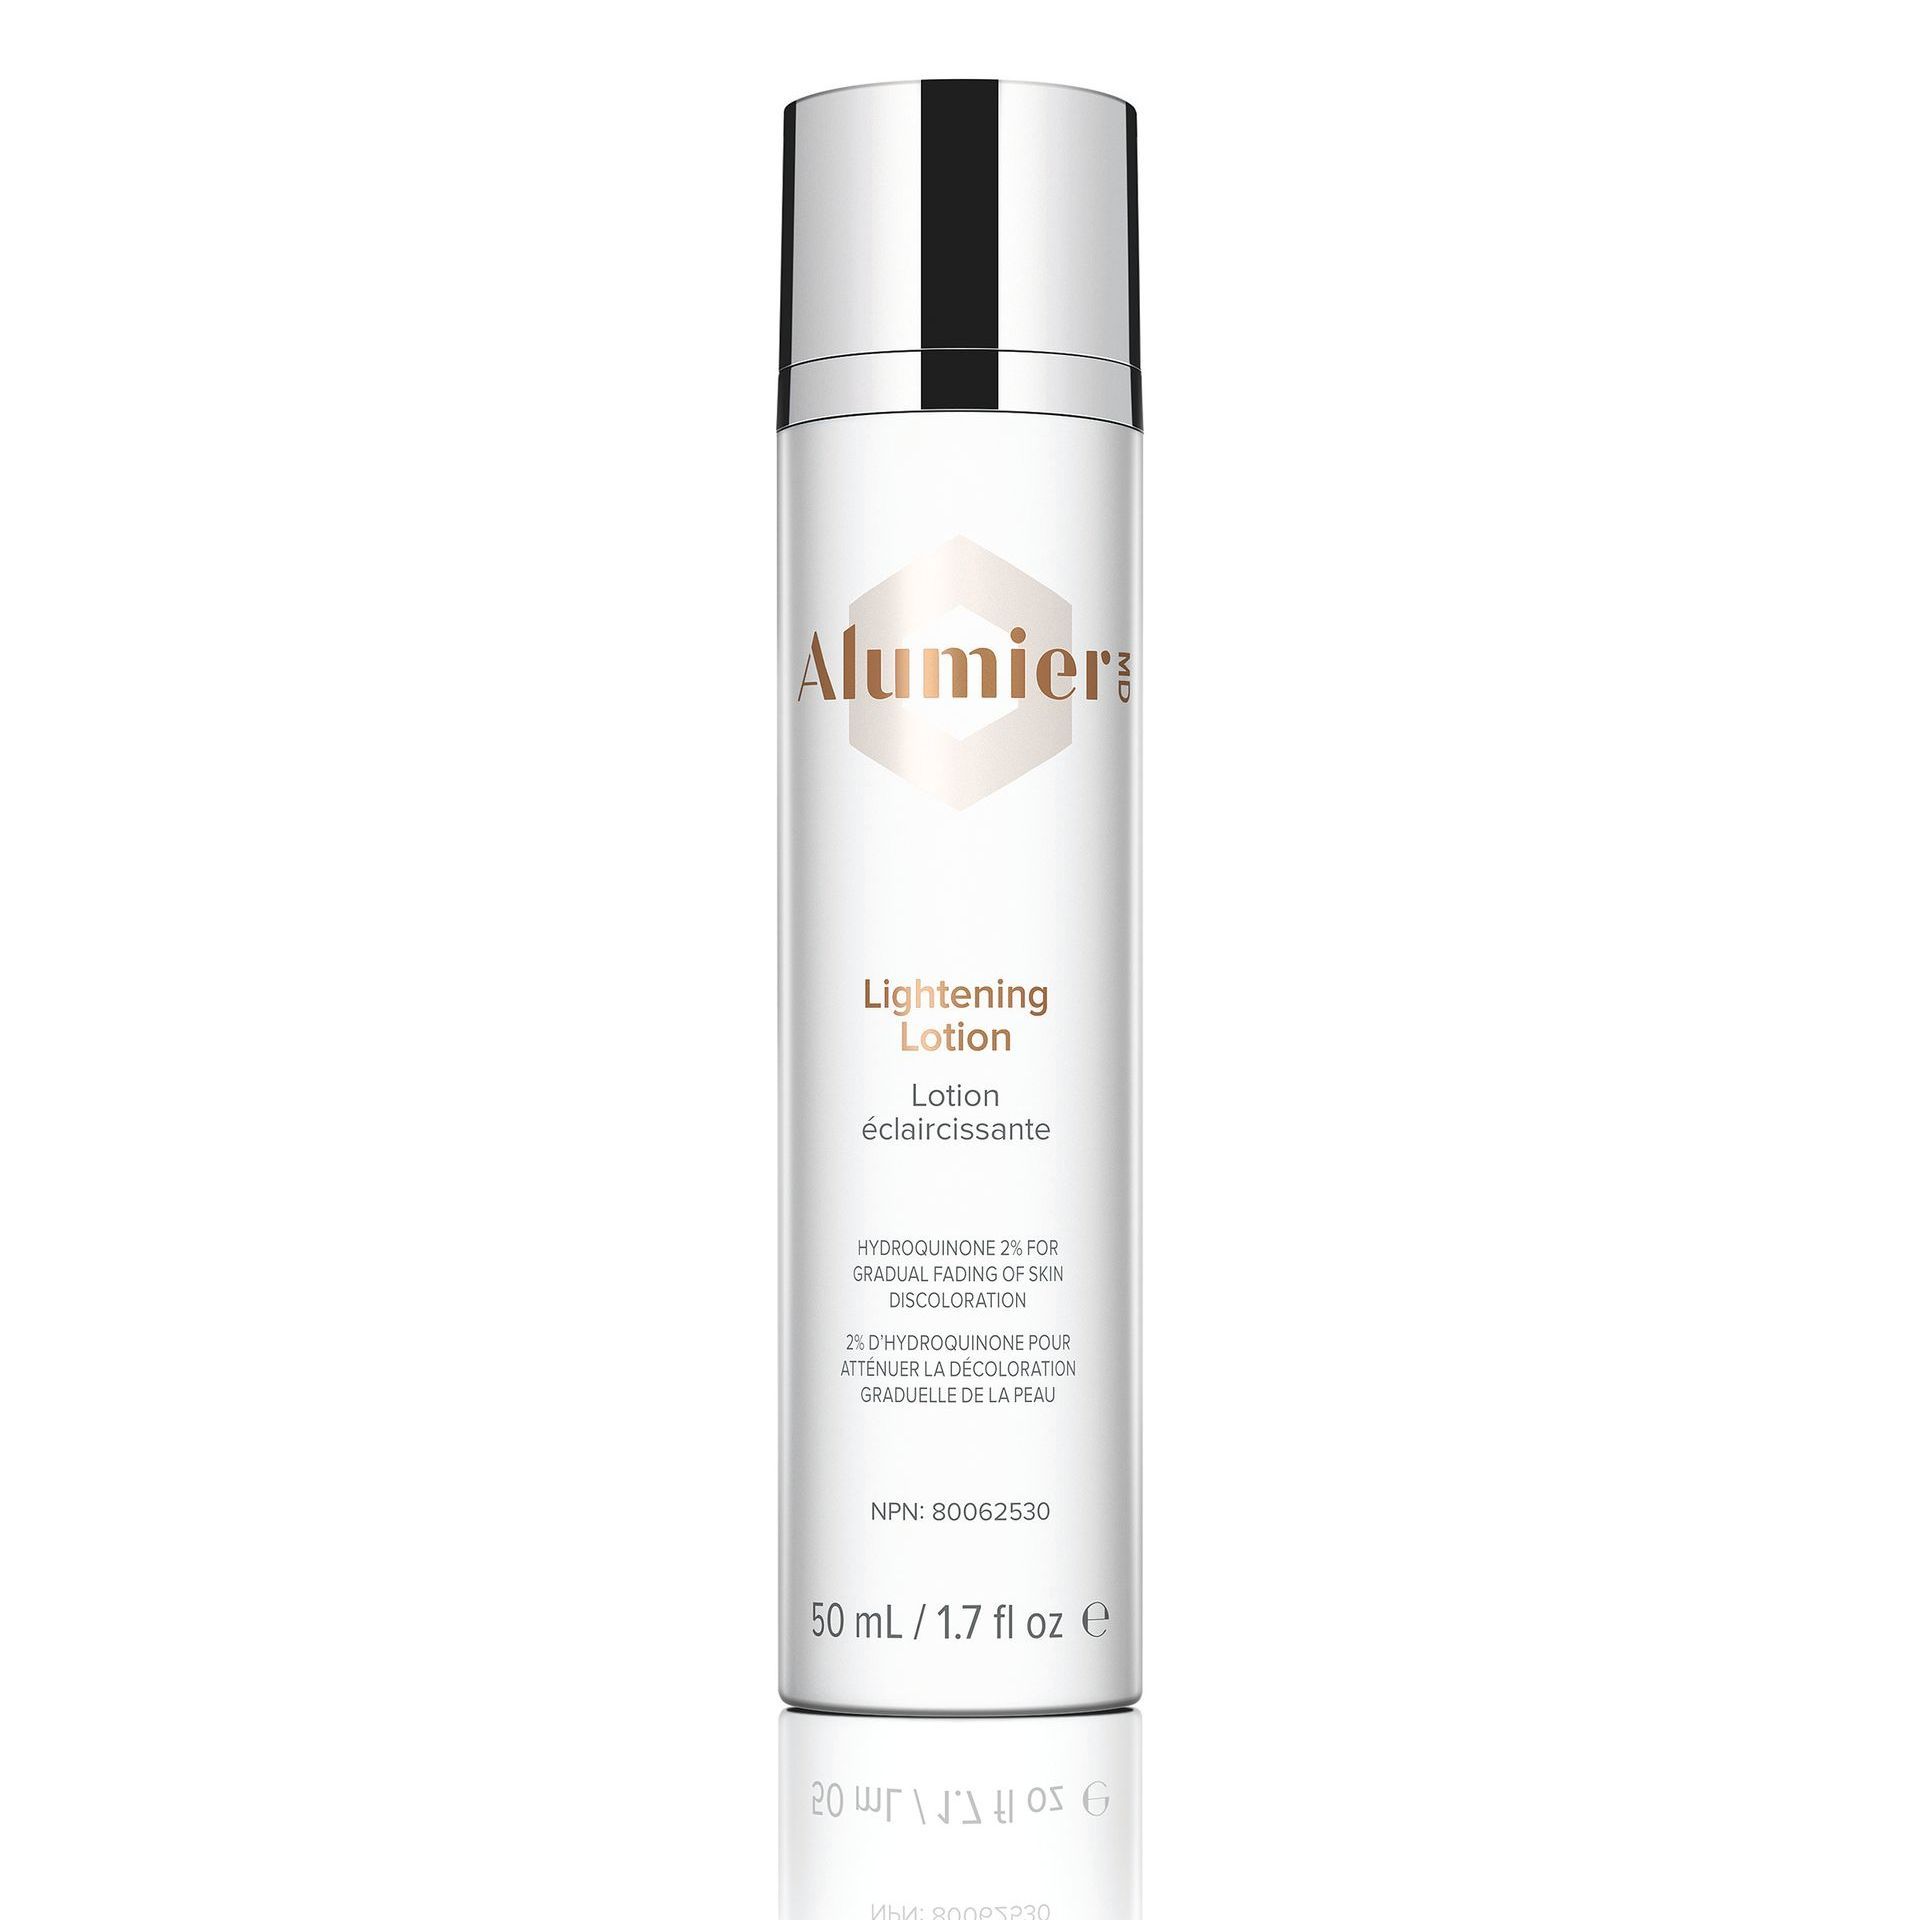 AlumierMD Lightening Lotion skin care product